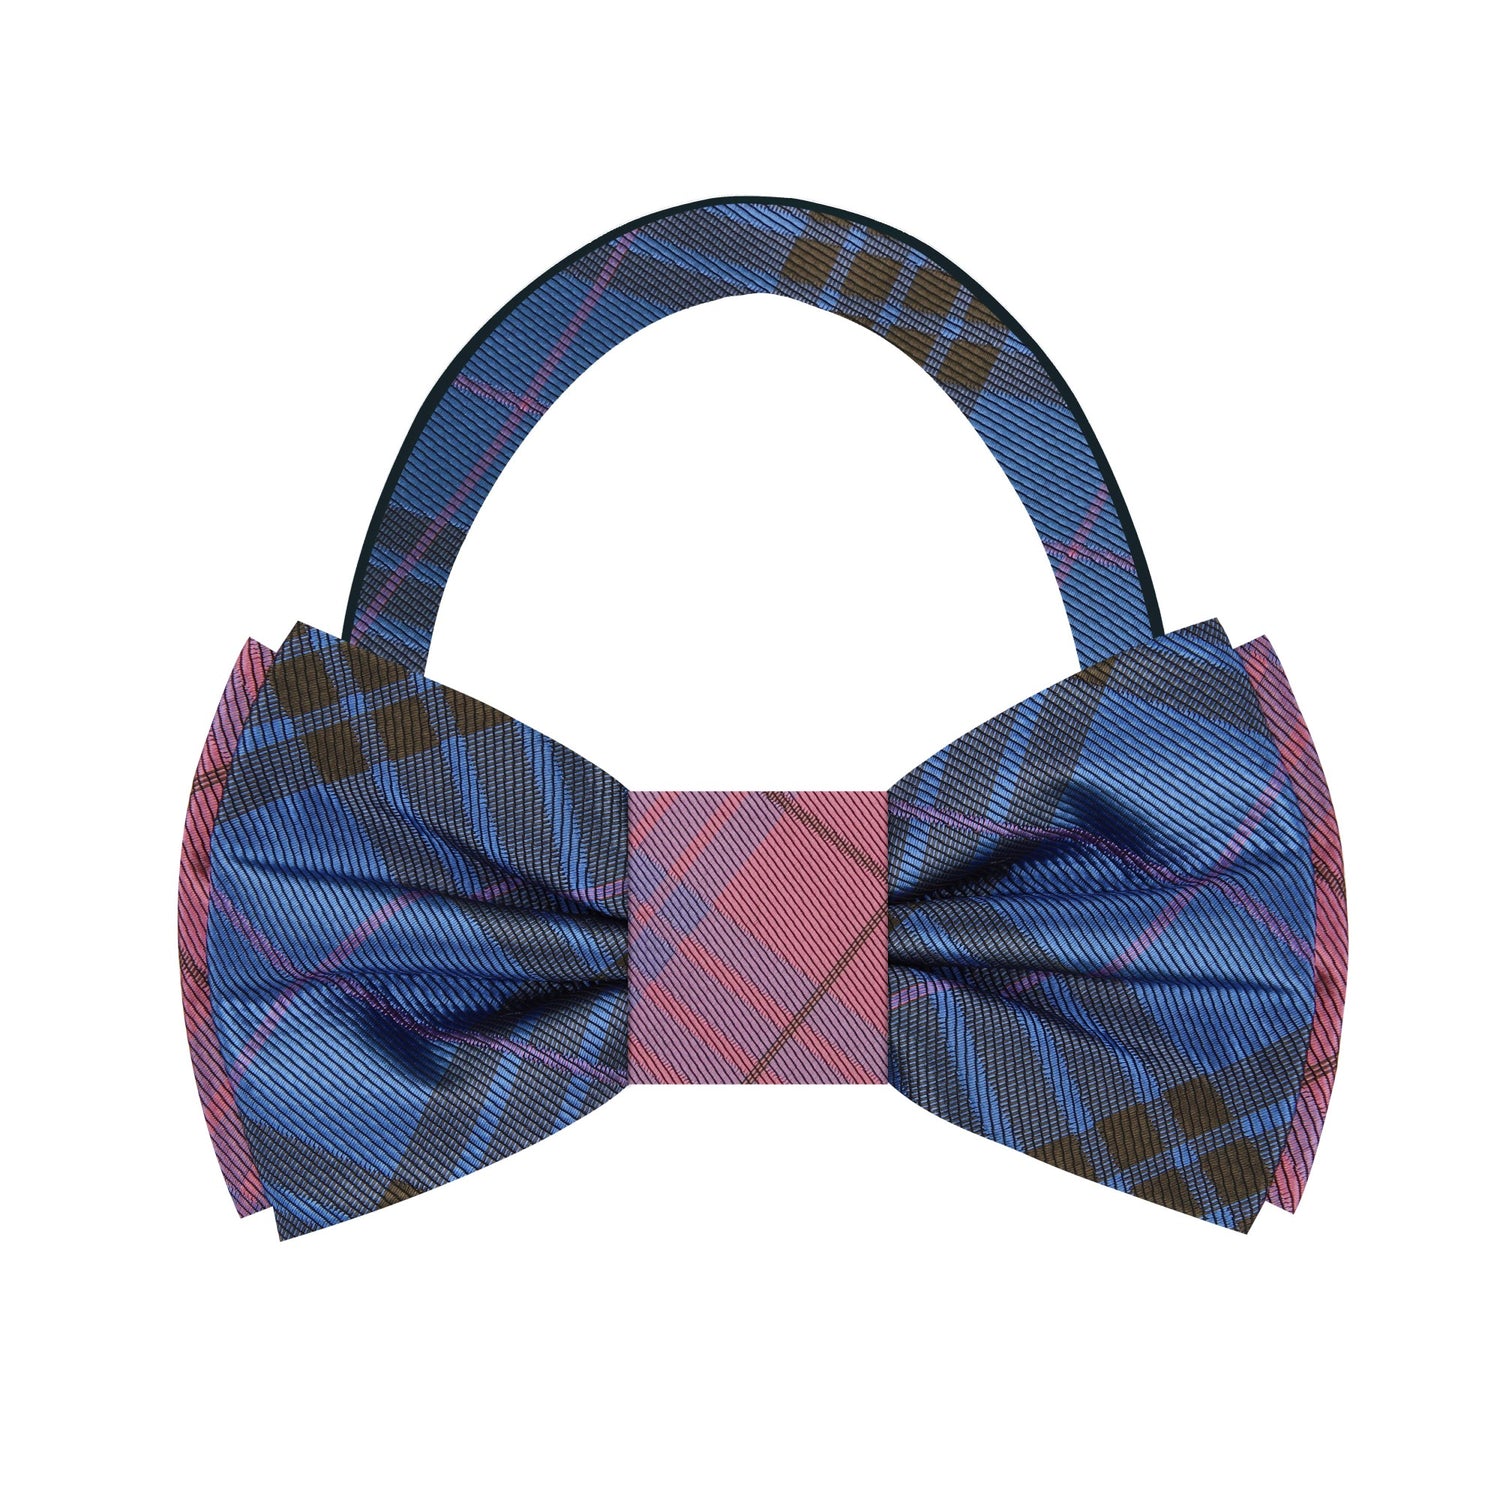 Blue, pink and brown double sided plaid bow tie pre tied